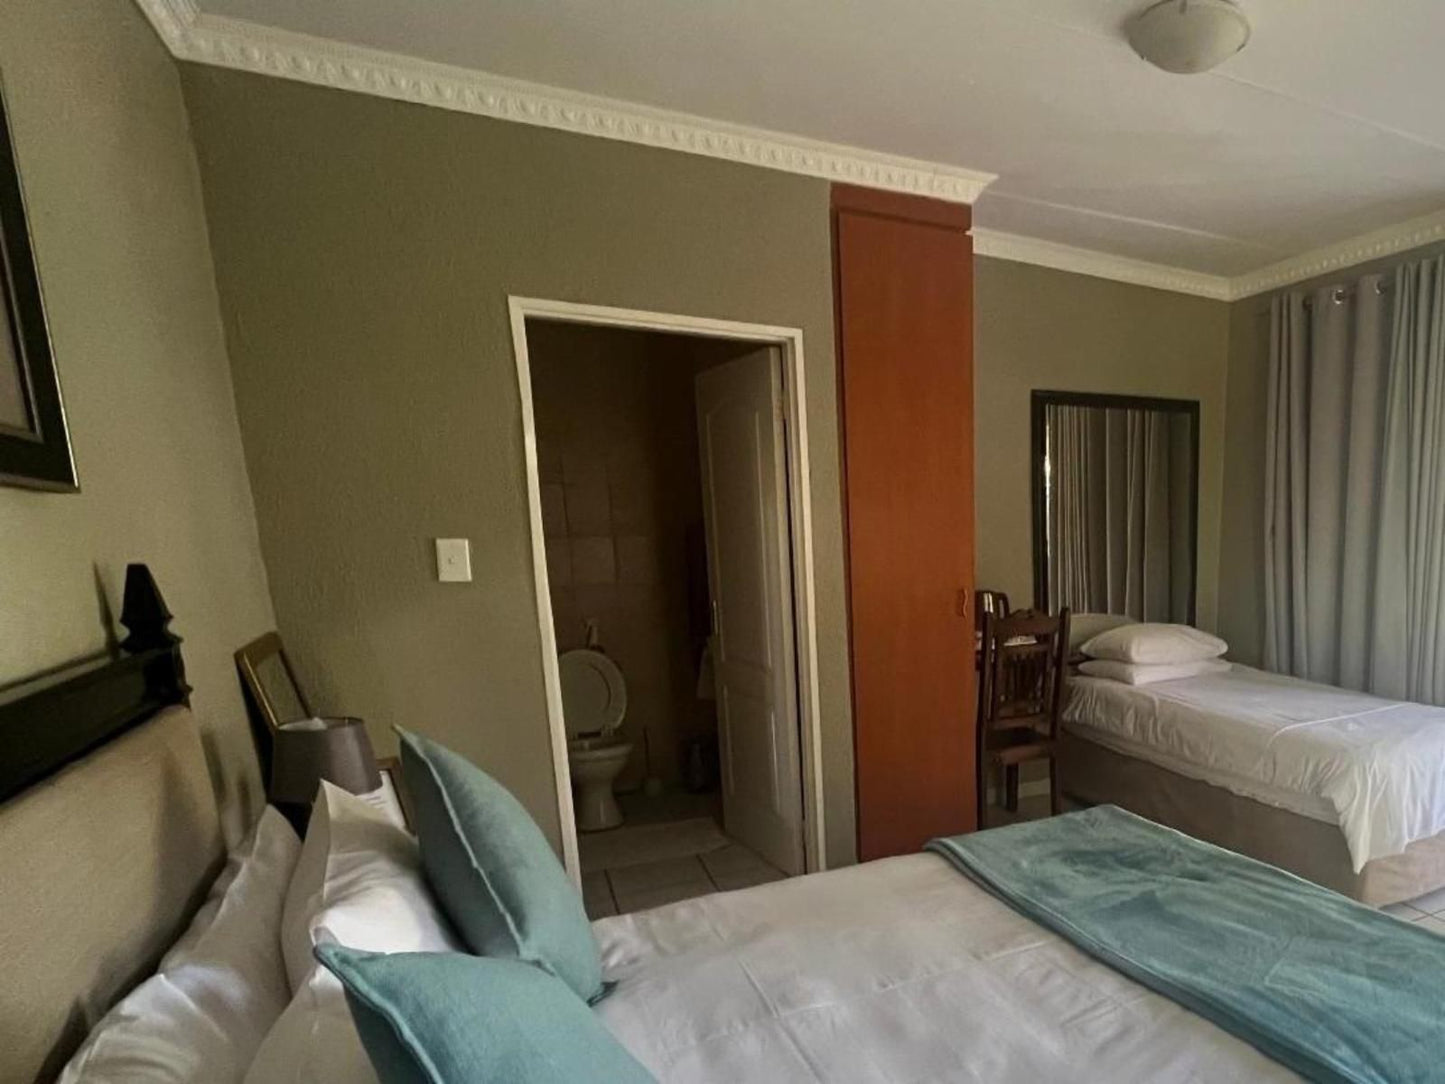 Toro Guest House Mogwase North West Province South Africa Bedroom